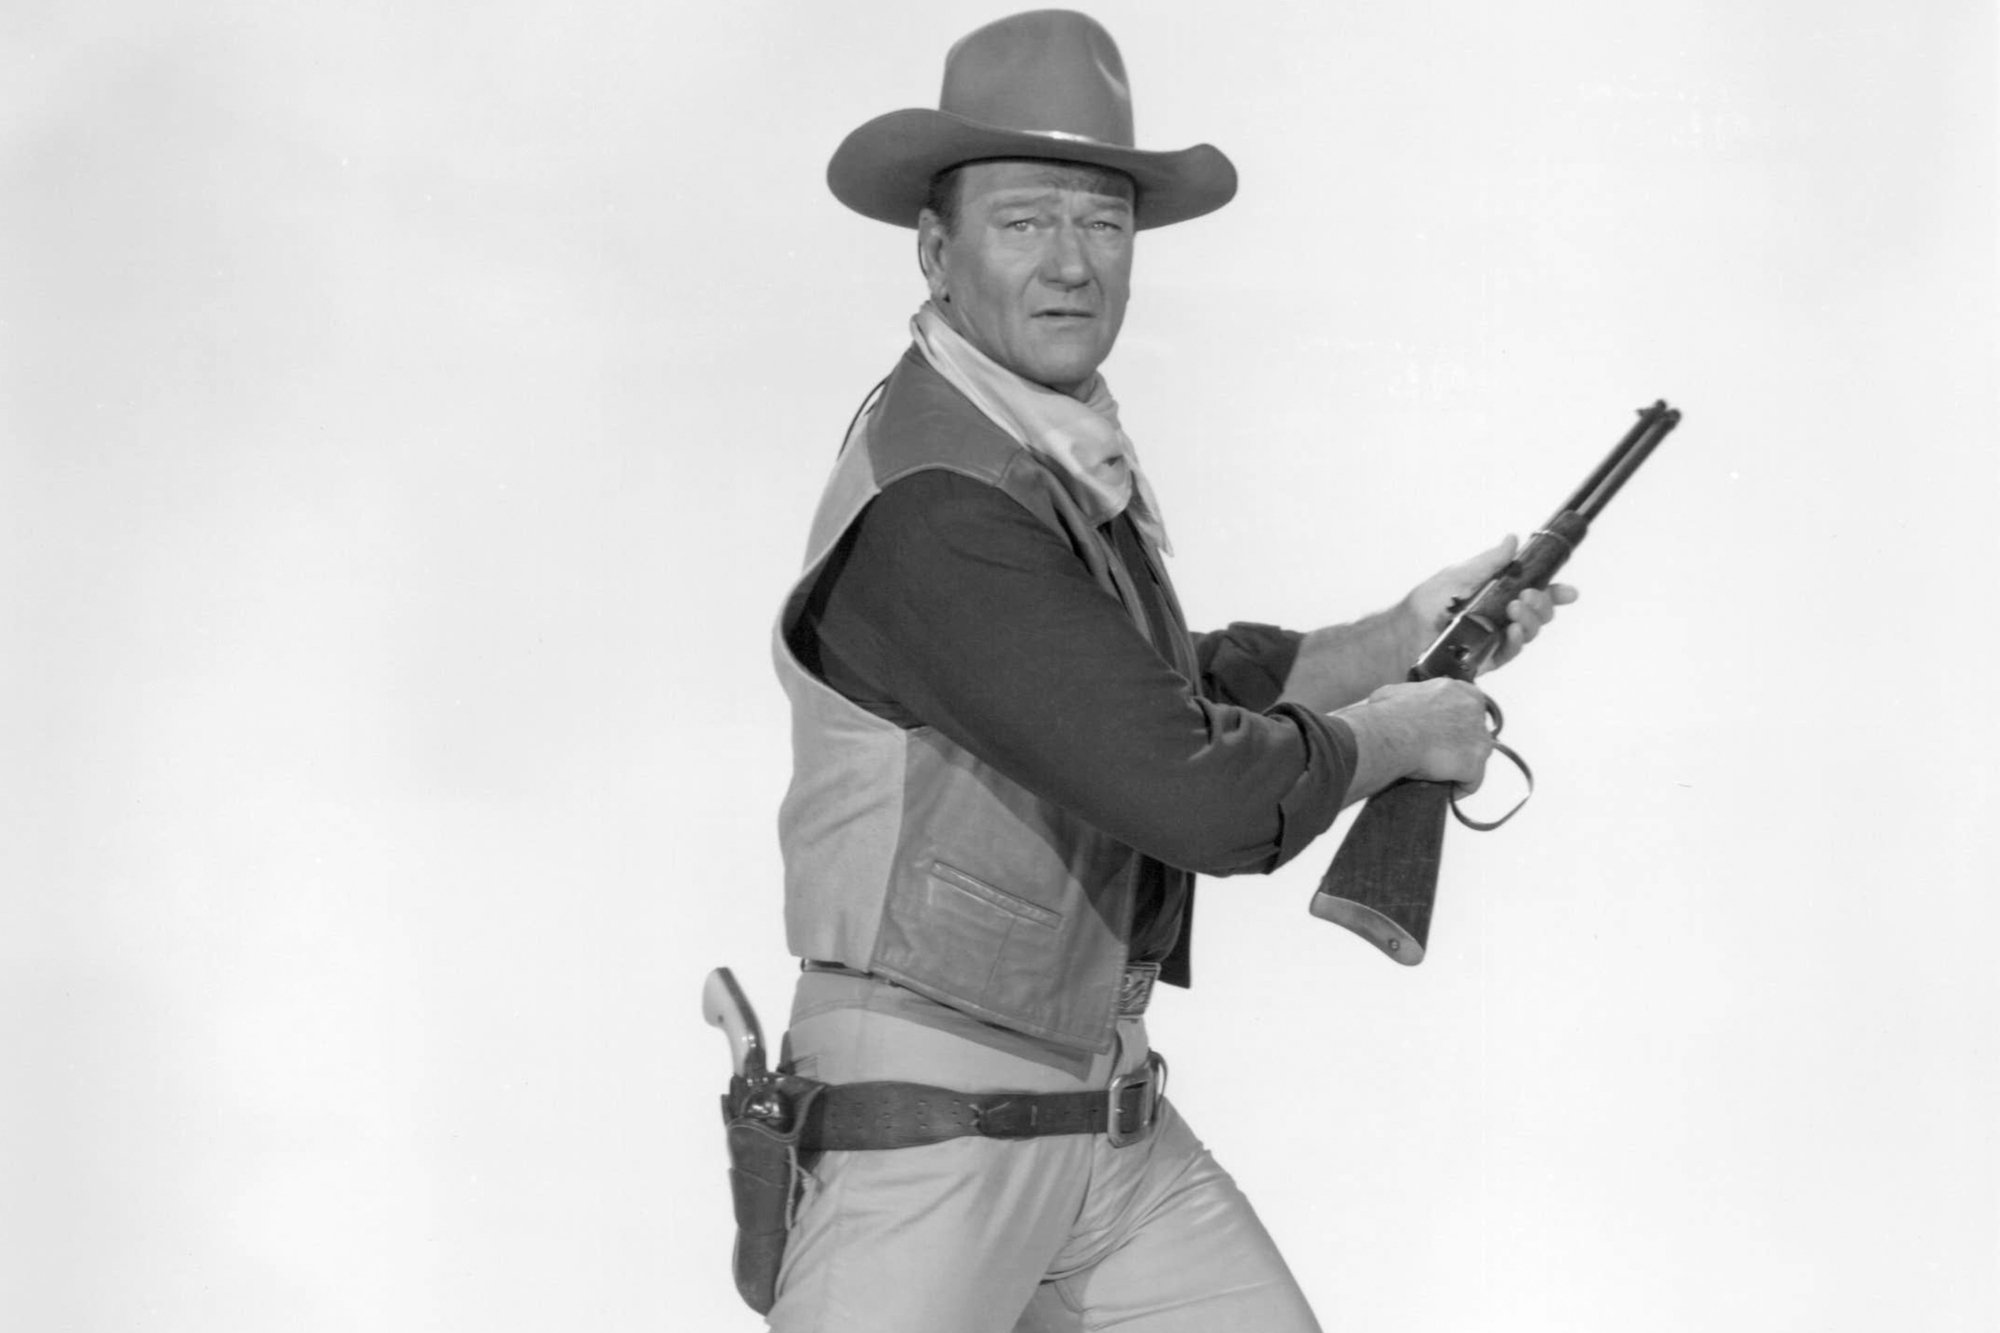 John Wayne, a movie star who made Westerns. A black-and-white picture with him wearing a cowboy costume and holding a rifle in front of a white background.